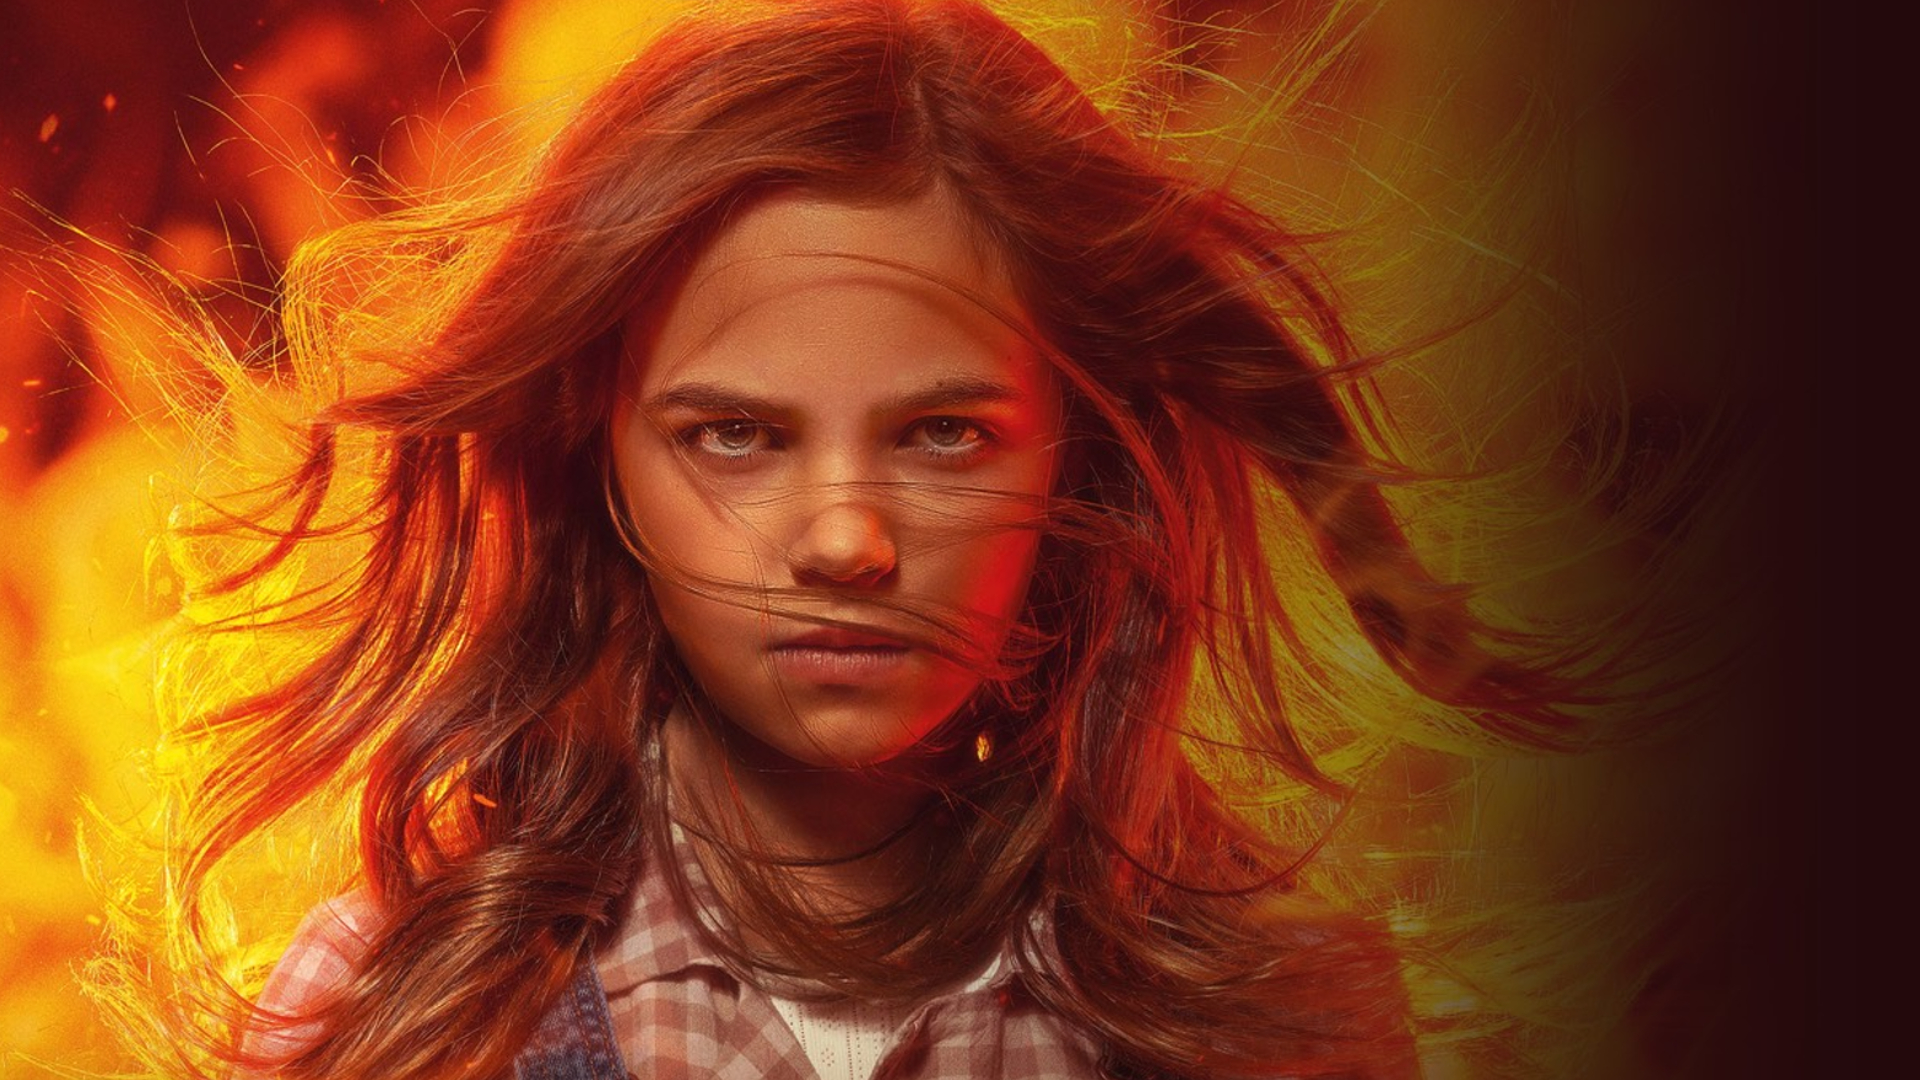 Zac Efron has a daughter with pyrokinetic powers in new trailer for Stephen King's Firestarter